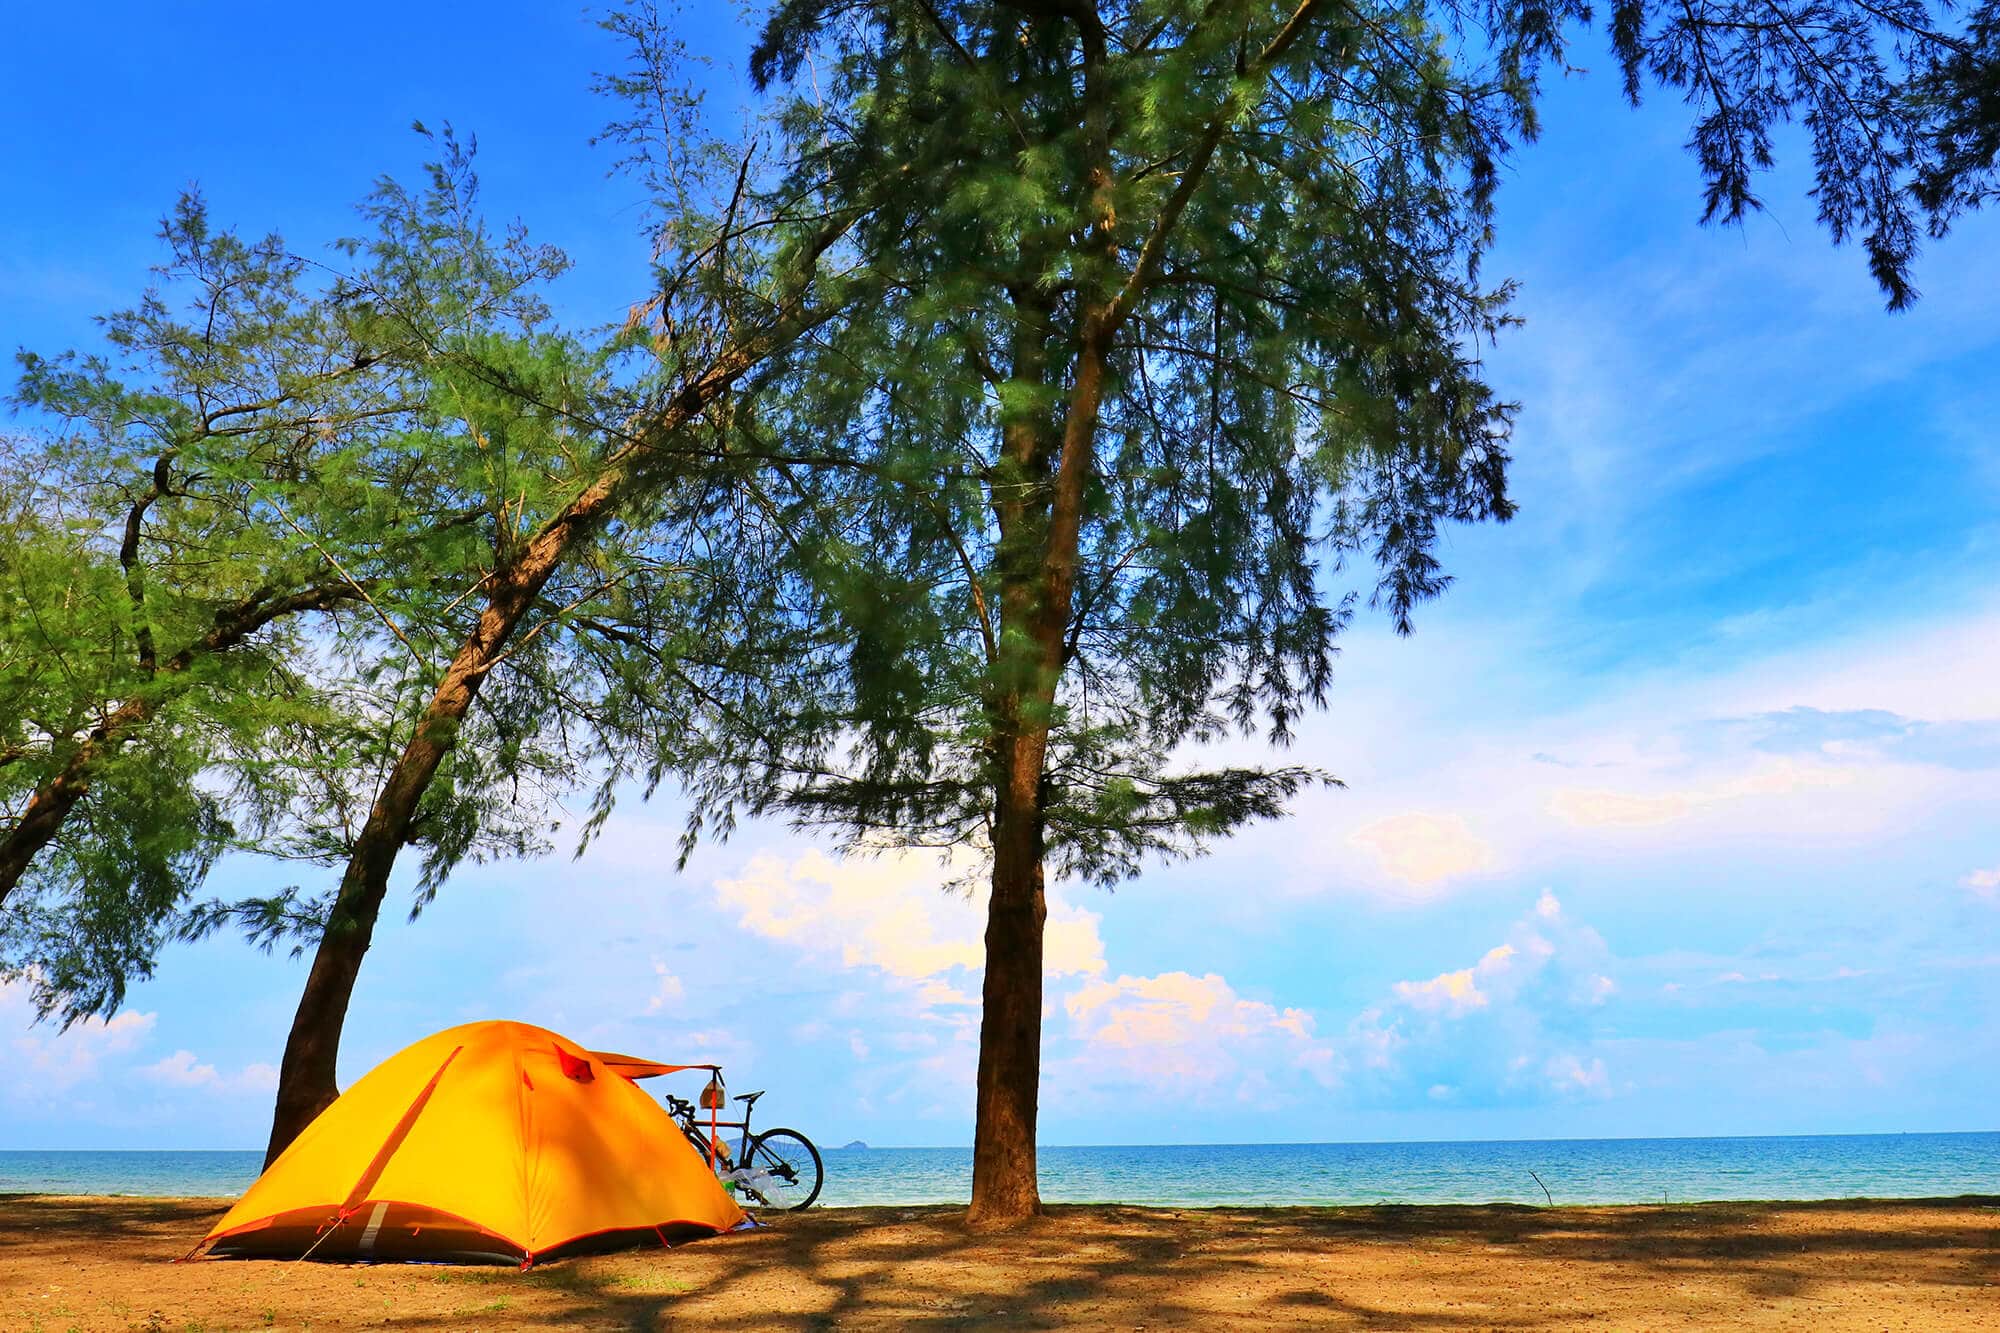 Small tent in hot summer weather near ocean Featured